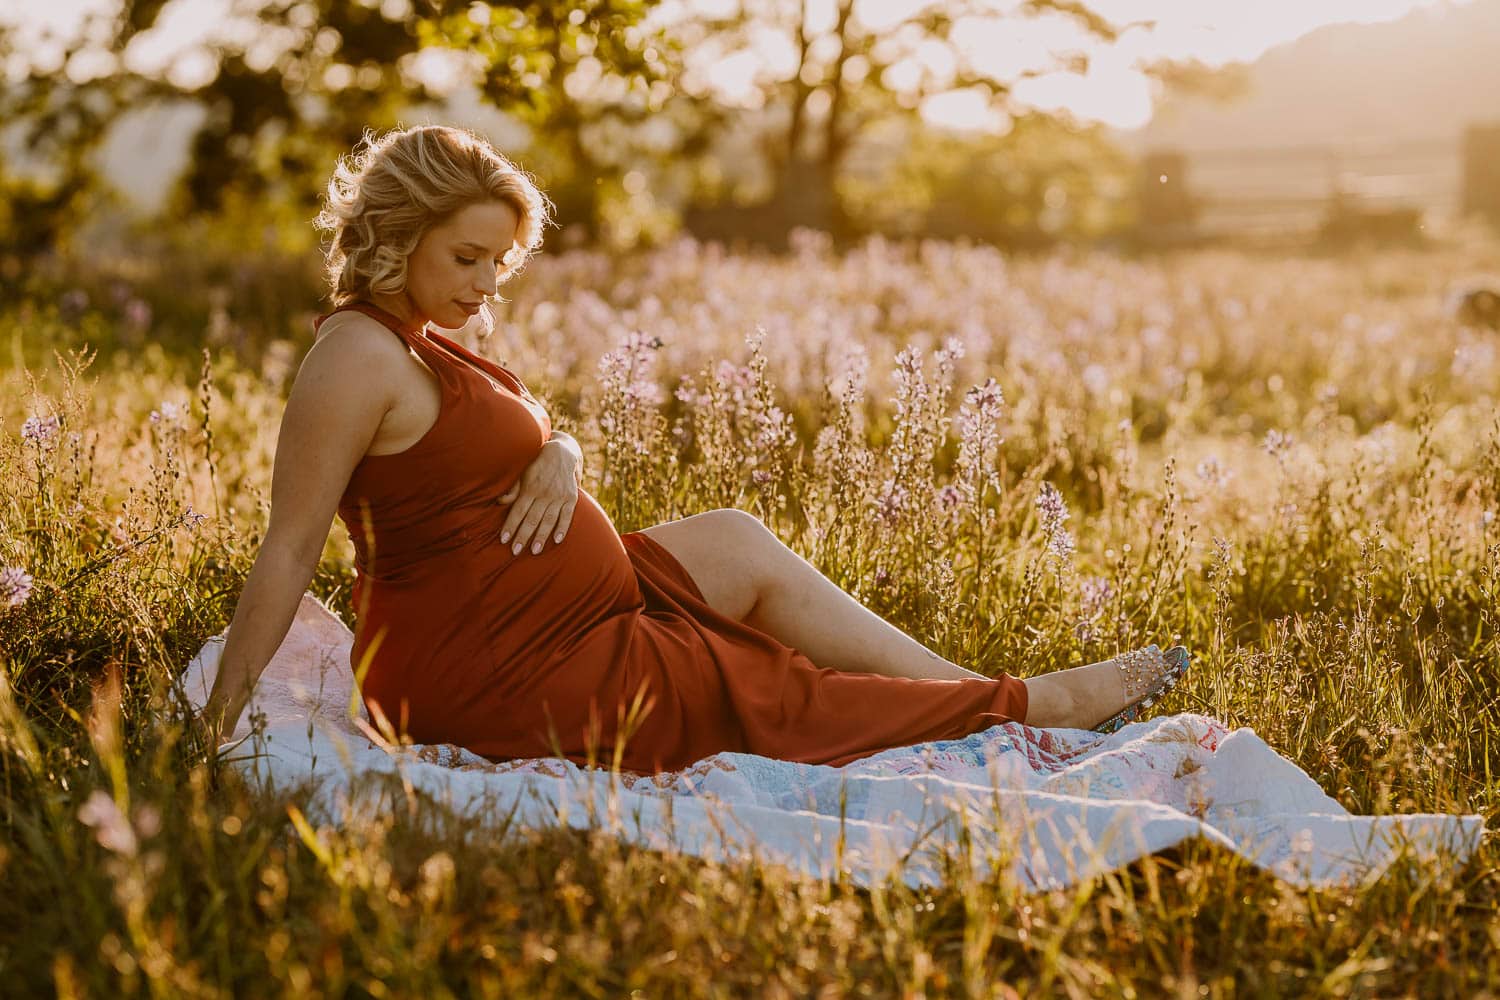 Beautiful mom sitting in a field of camas lilies during maternity photos - portland oregon photo location